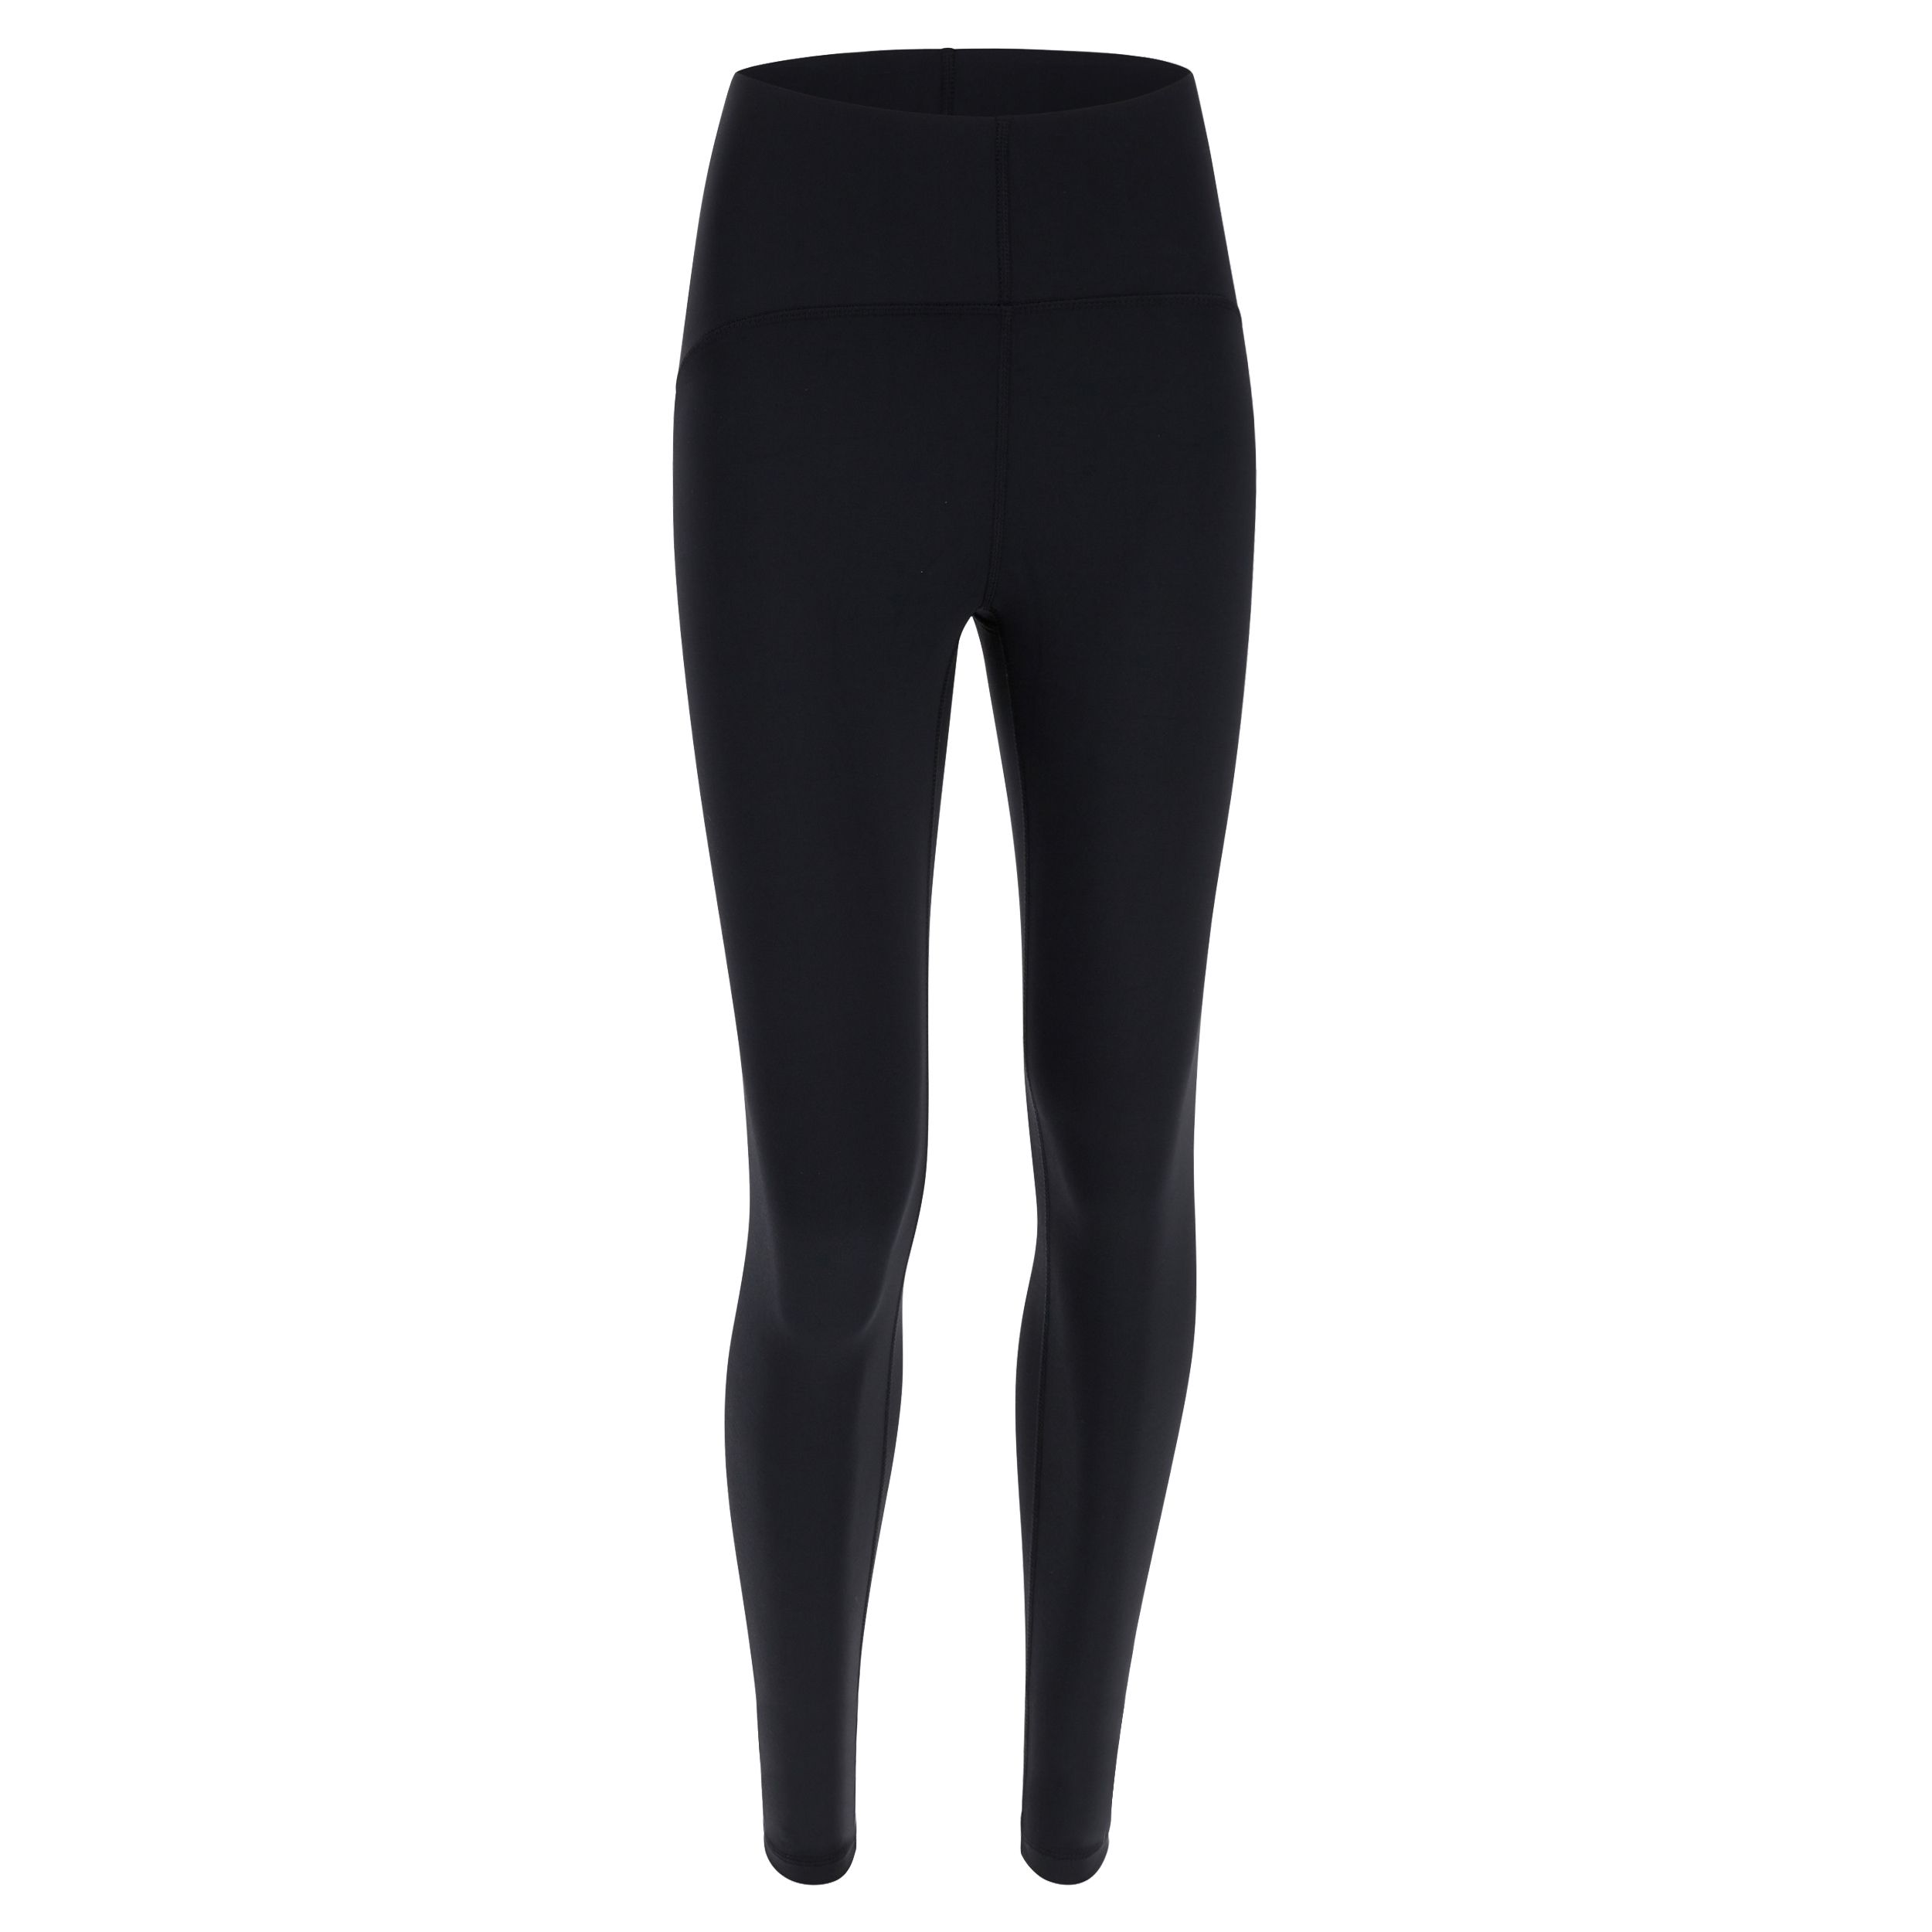 Breathable ankle-length SuperFit leggings with a super-high waist